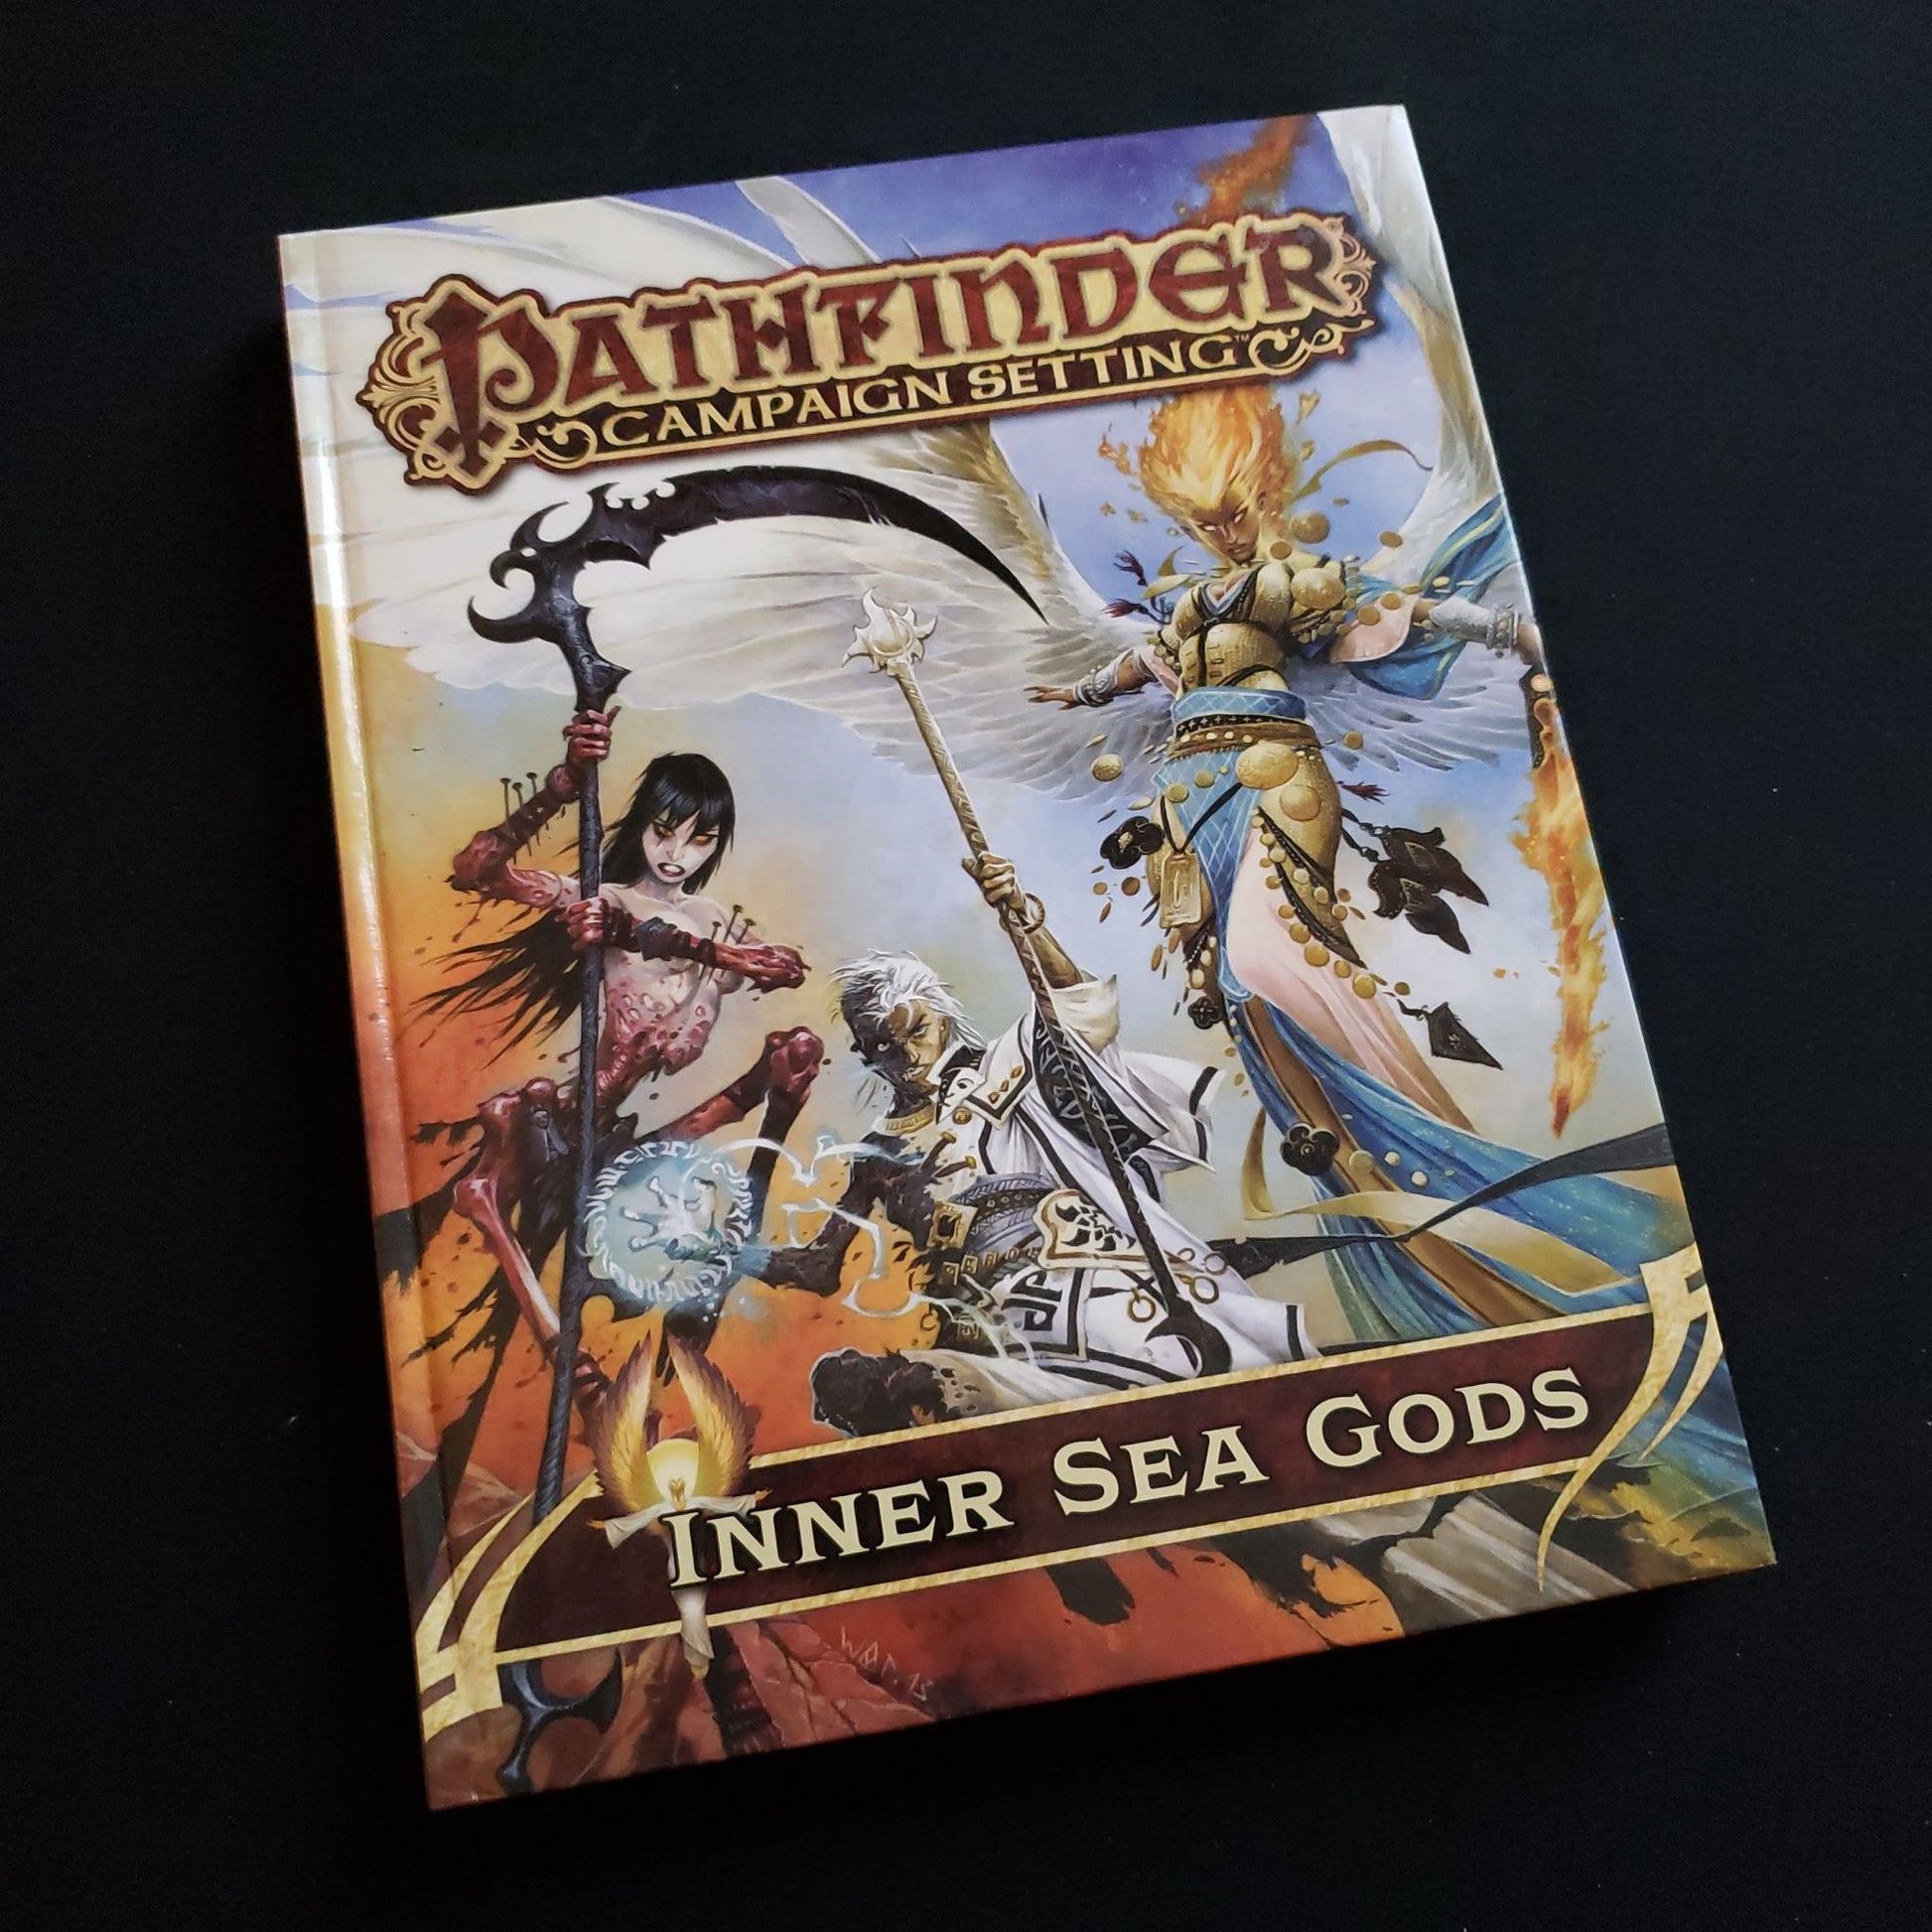 Pathfinder RPG campaign setting - inner sea gods - front cover of book